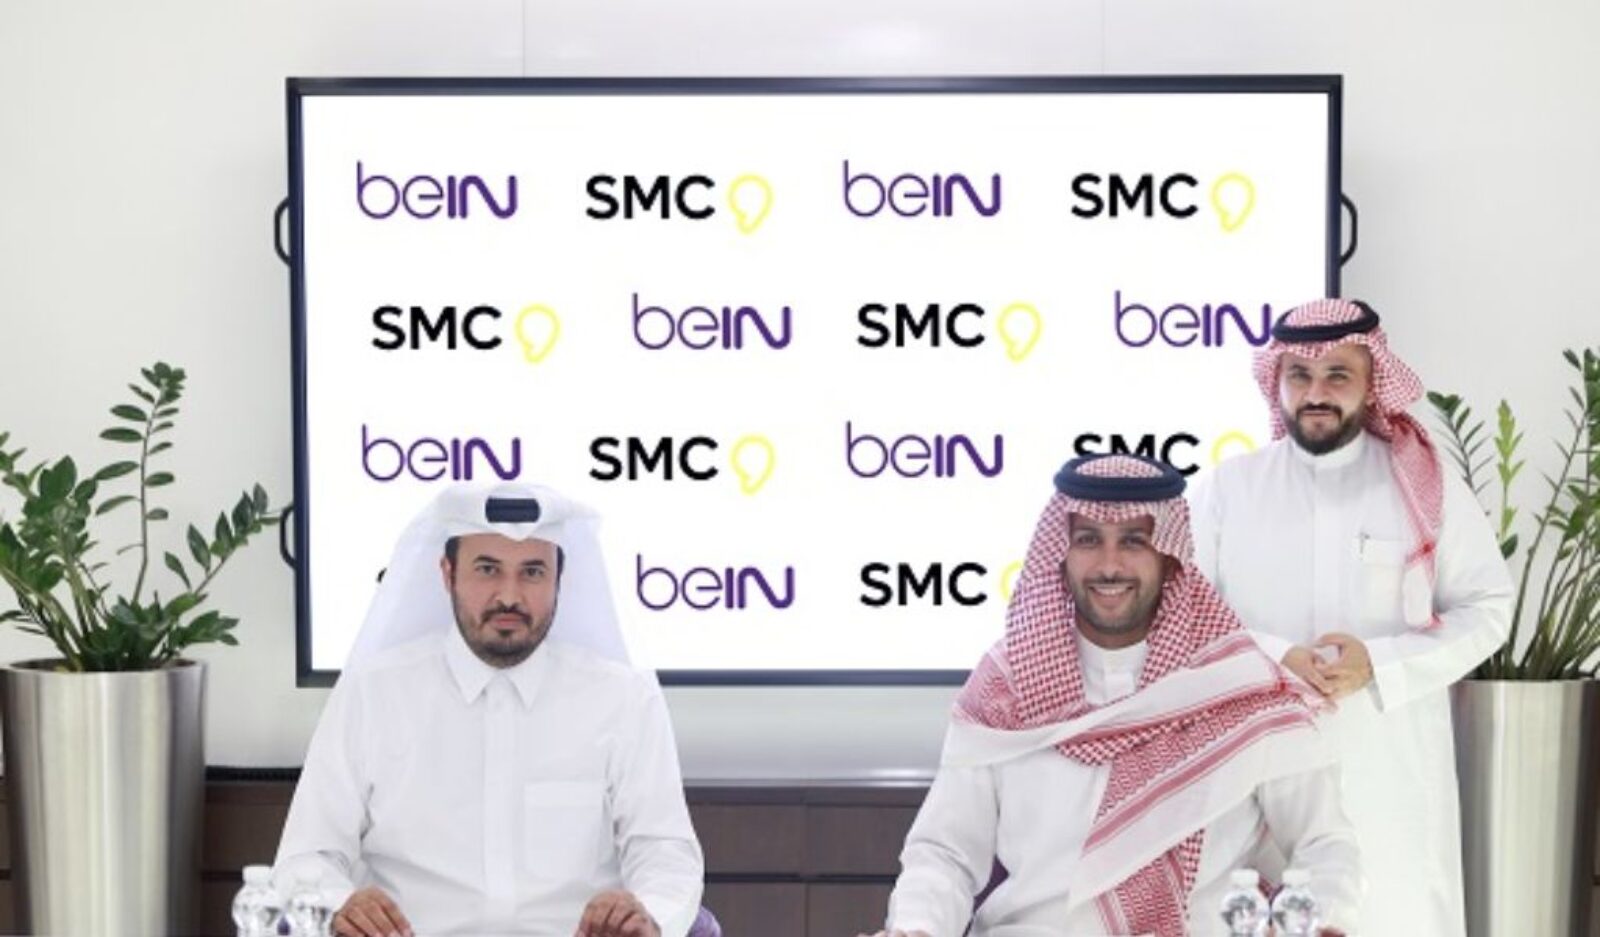 BeIN Media Appoints SMC As An Exclusive Advertising Partner In MENA